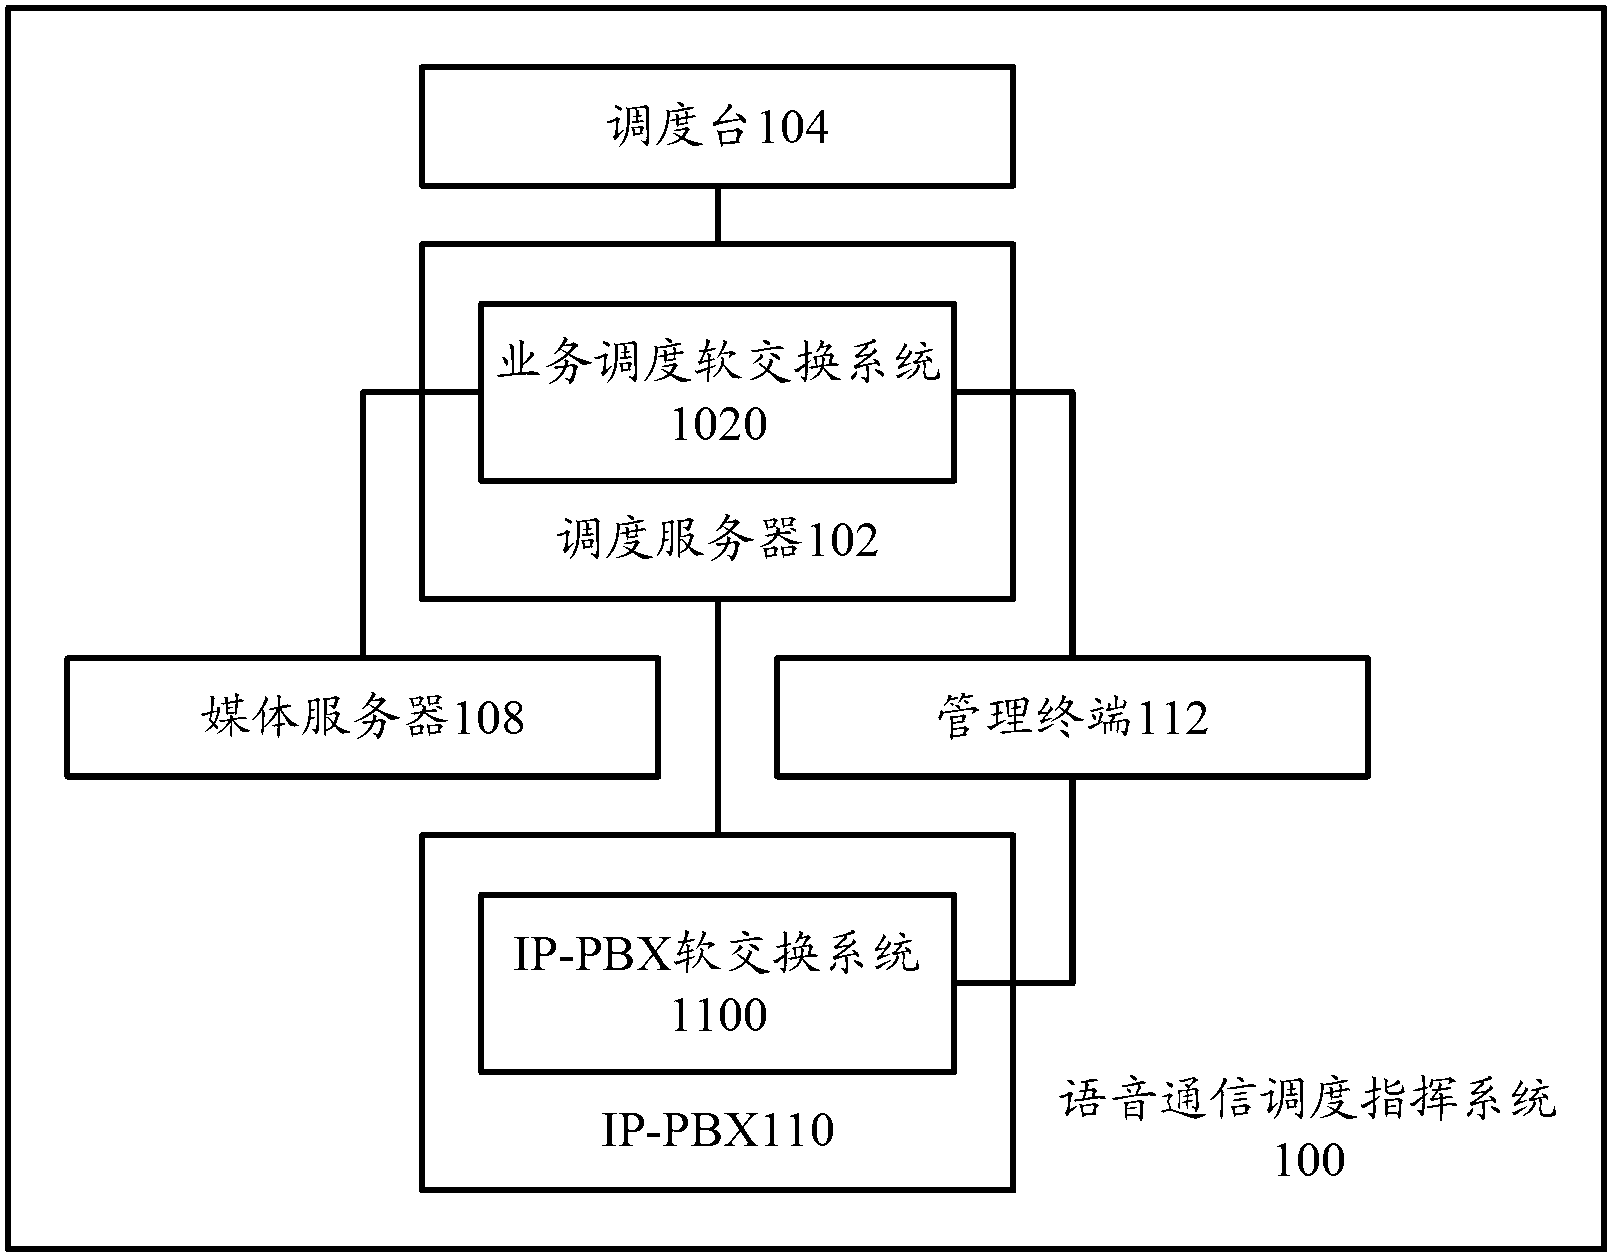 Voice communication scheduling command system